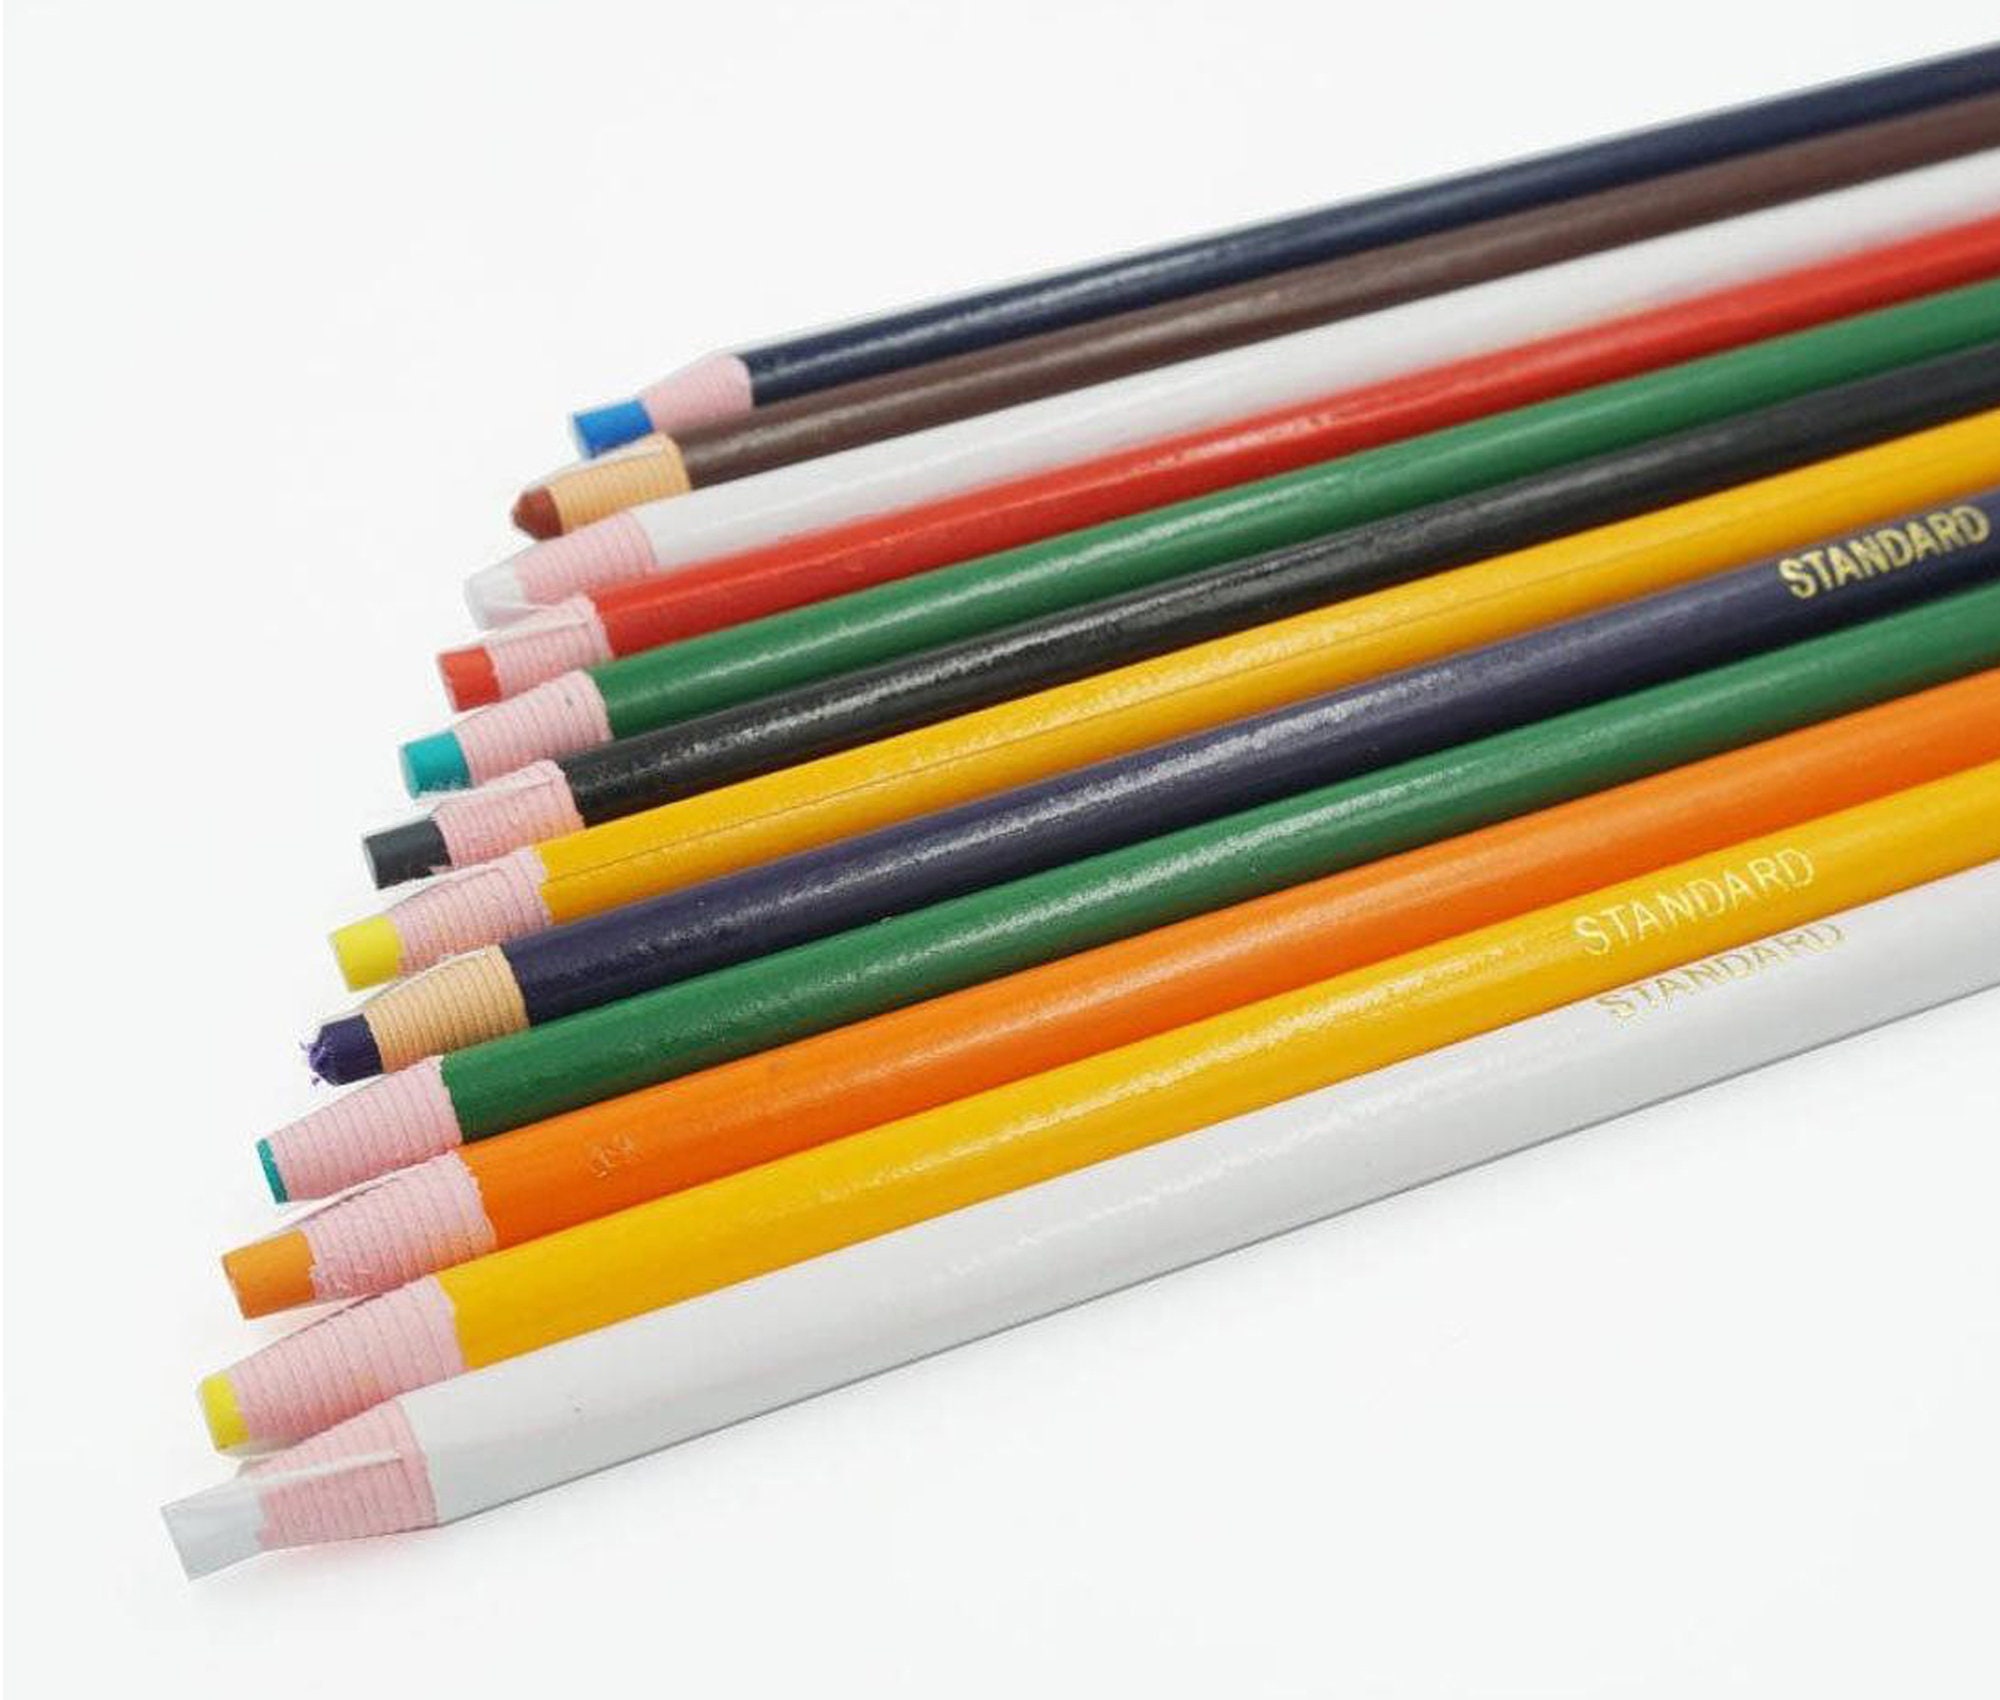 3x Stabilo-All Pencils, Choose Colors - Writes on Metal, Glass, Plastic &  more